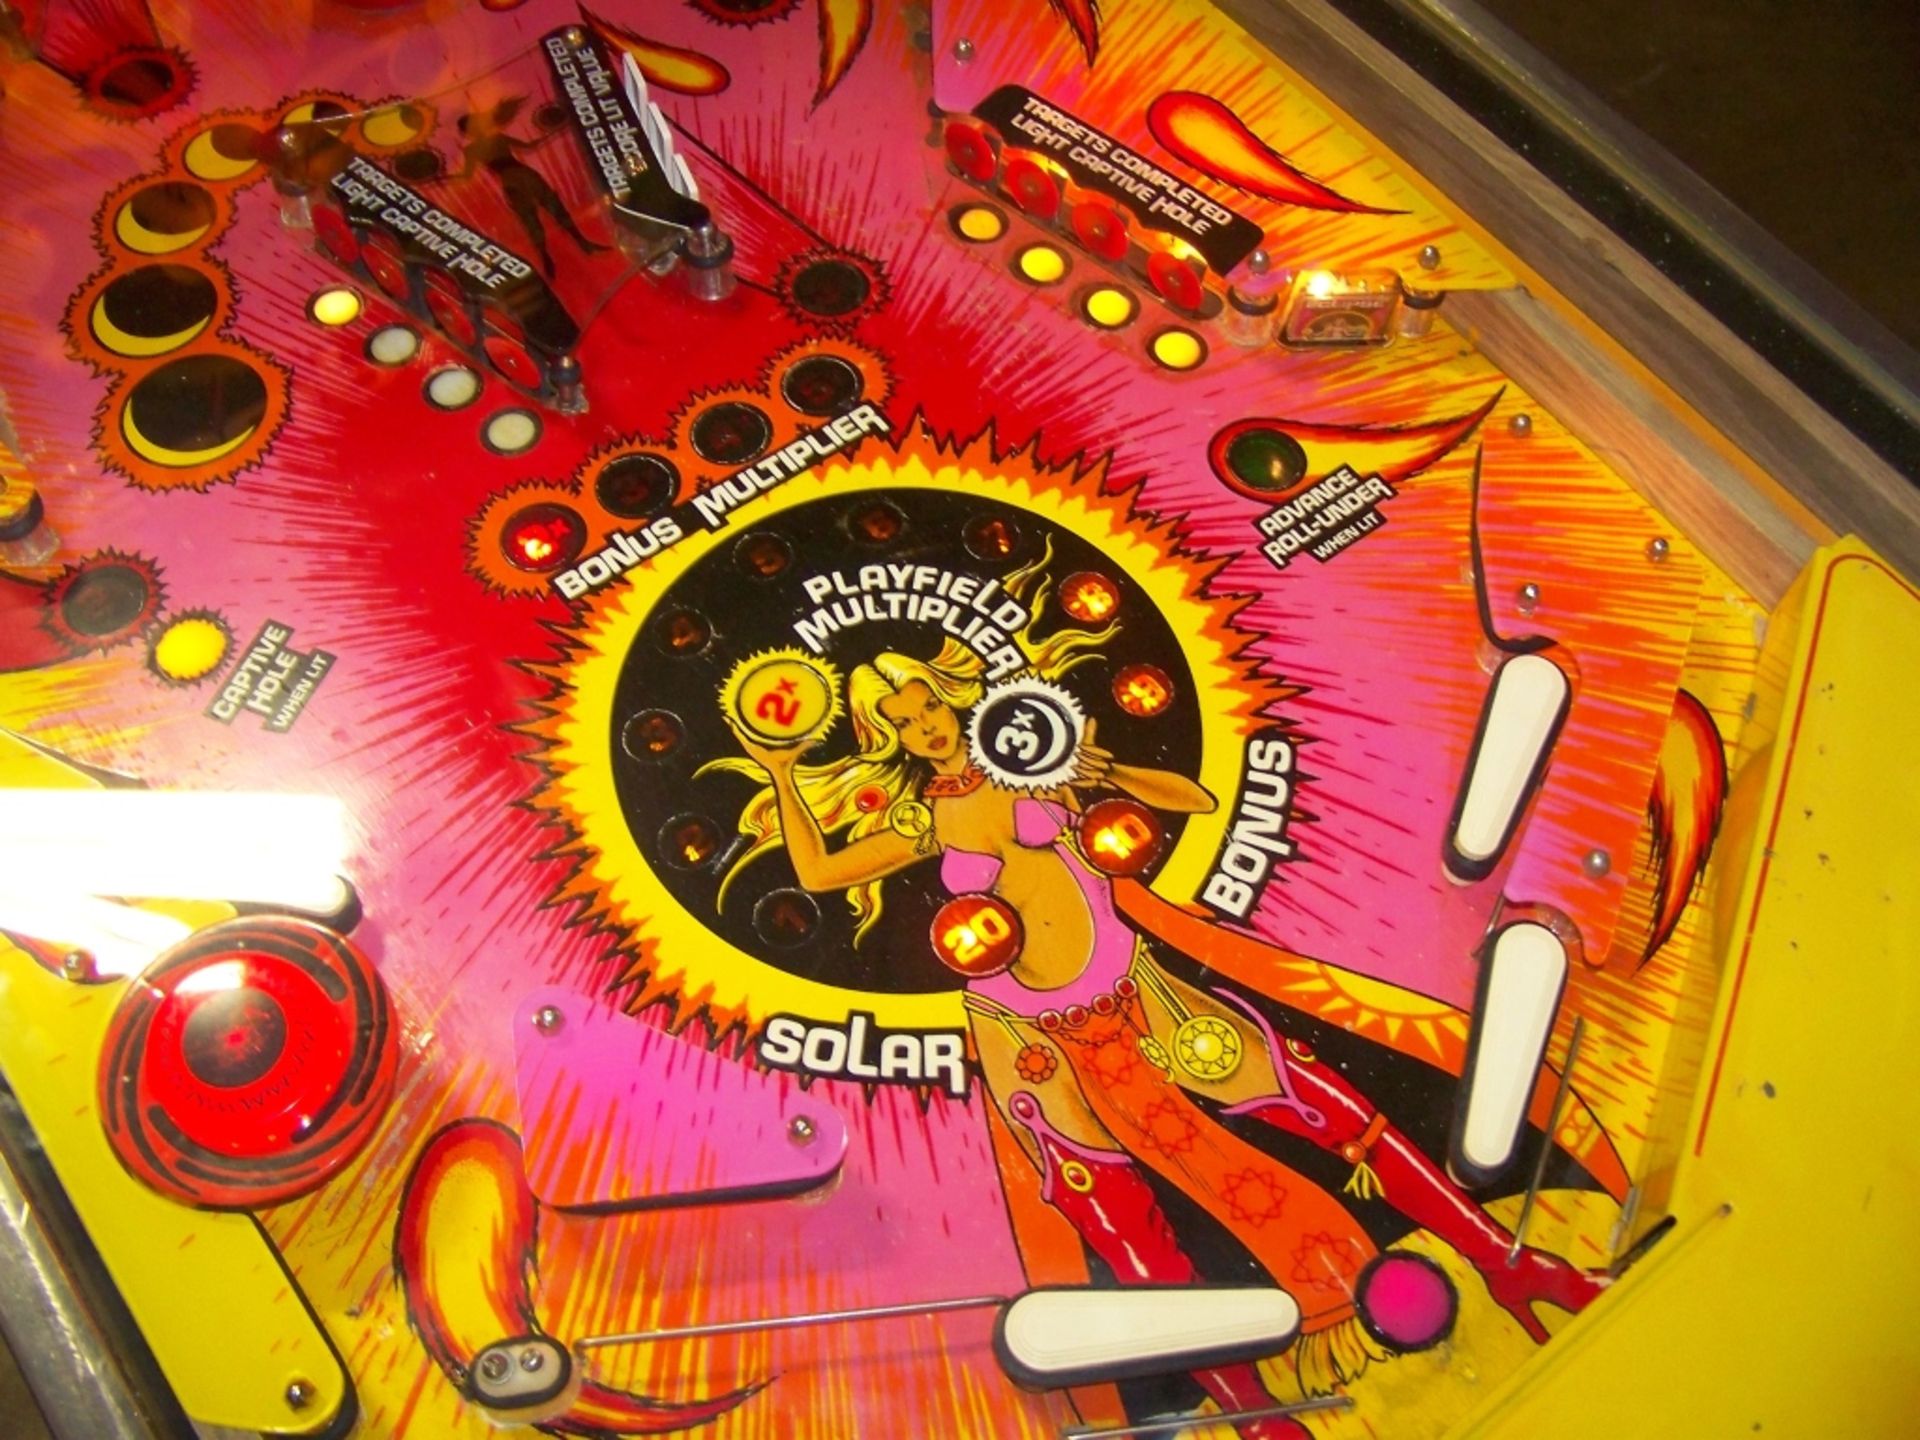 ECLIPSE PINBALL MACHINE RARE GOTTLIEB TITLE 1982 Item is in used condition. Evidence of wear and - Image 8 of 11